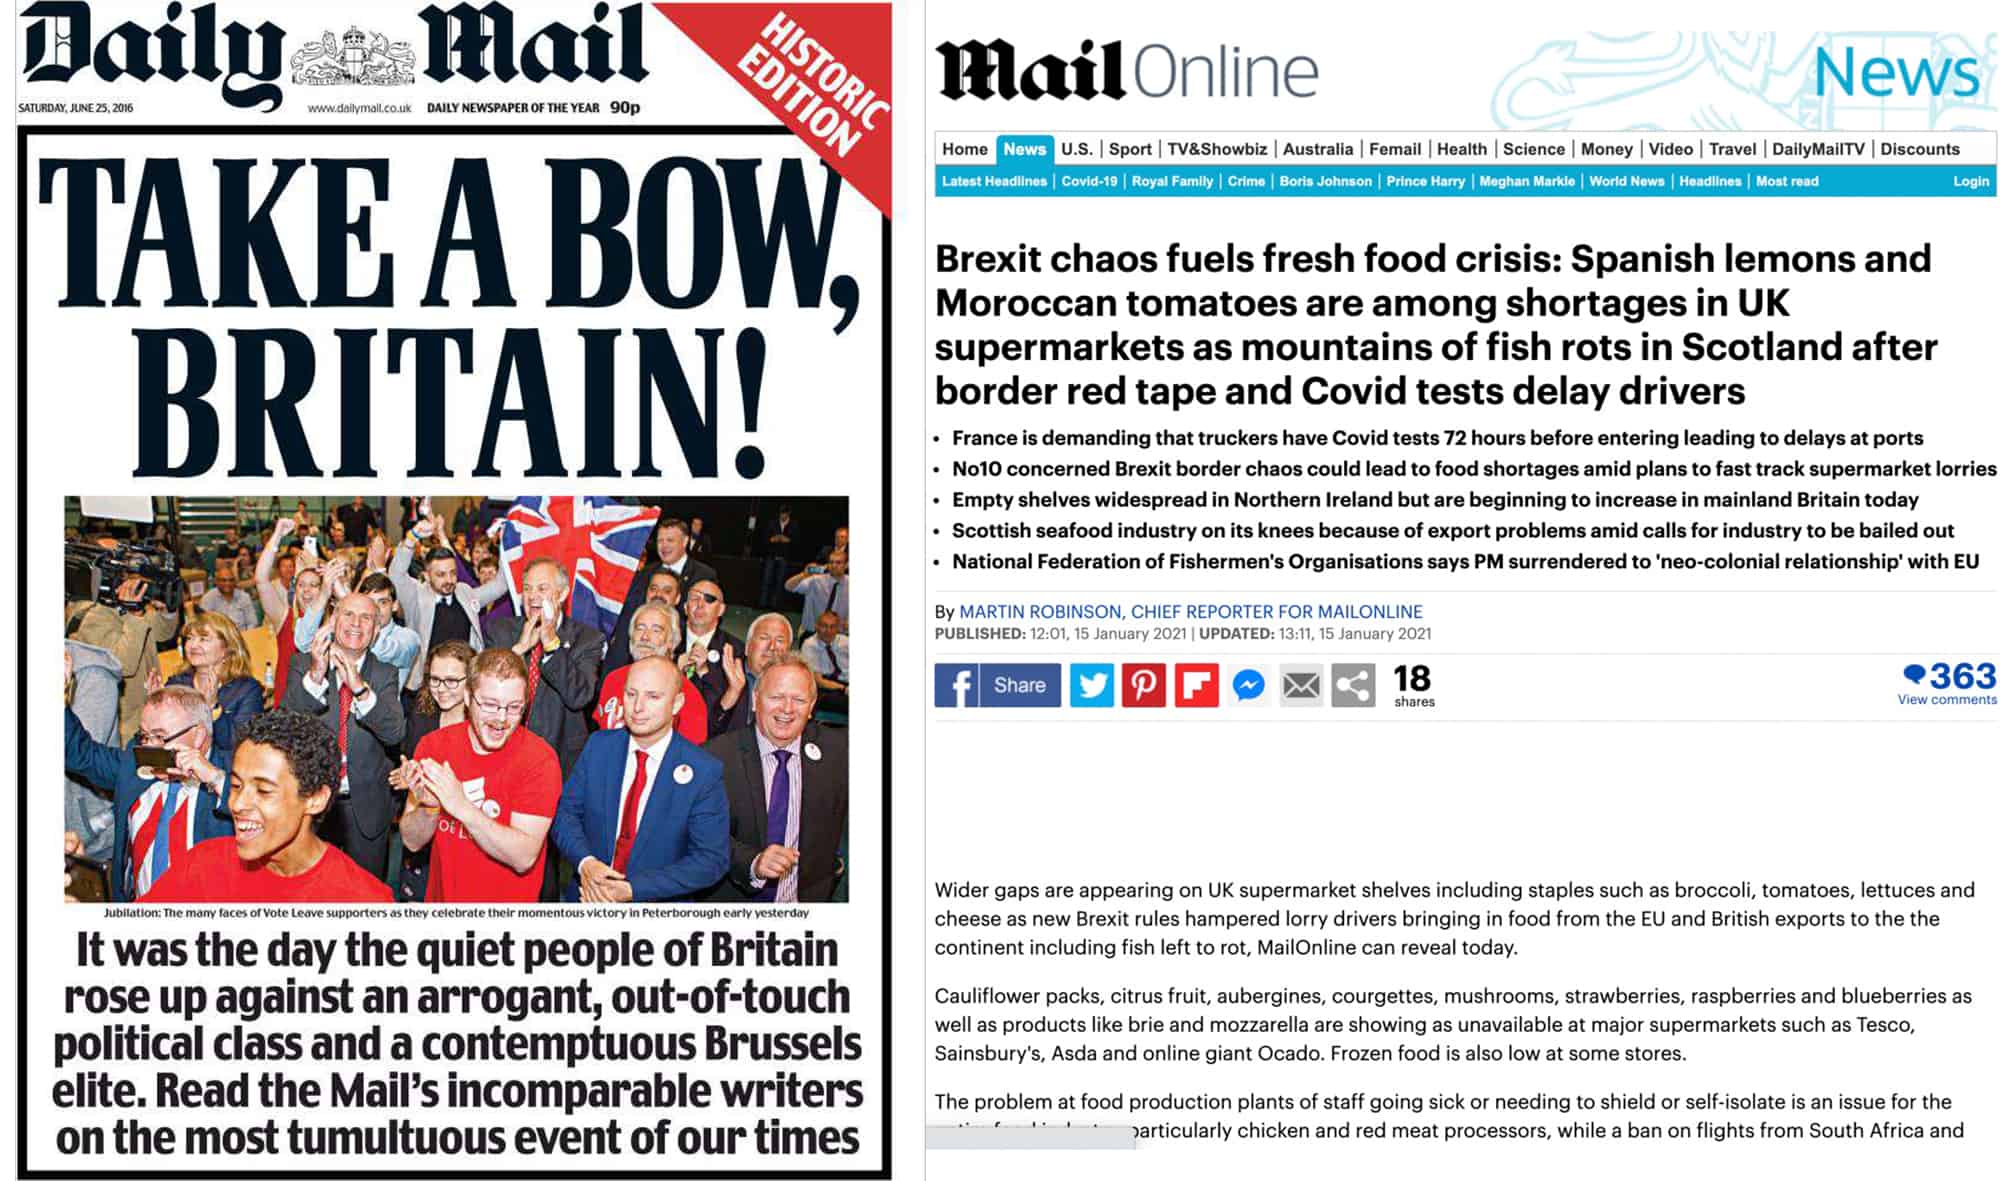 Daily Mail warns of Brexit food crisis as mountains of fish rots and fresh food is held up